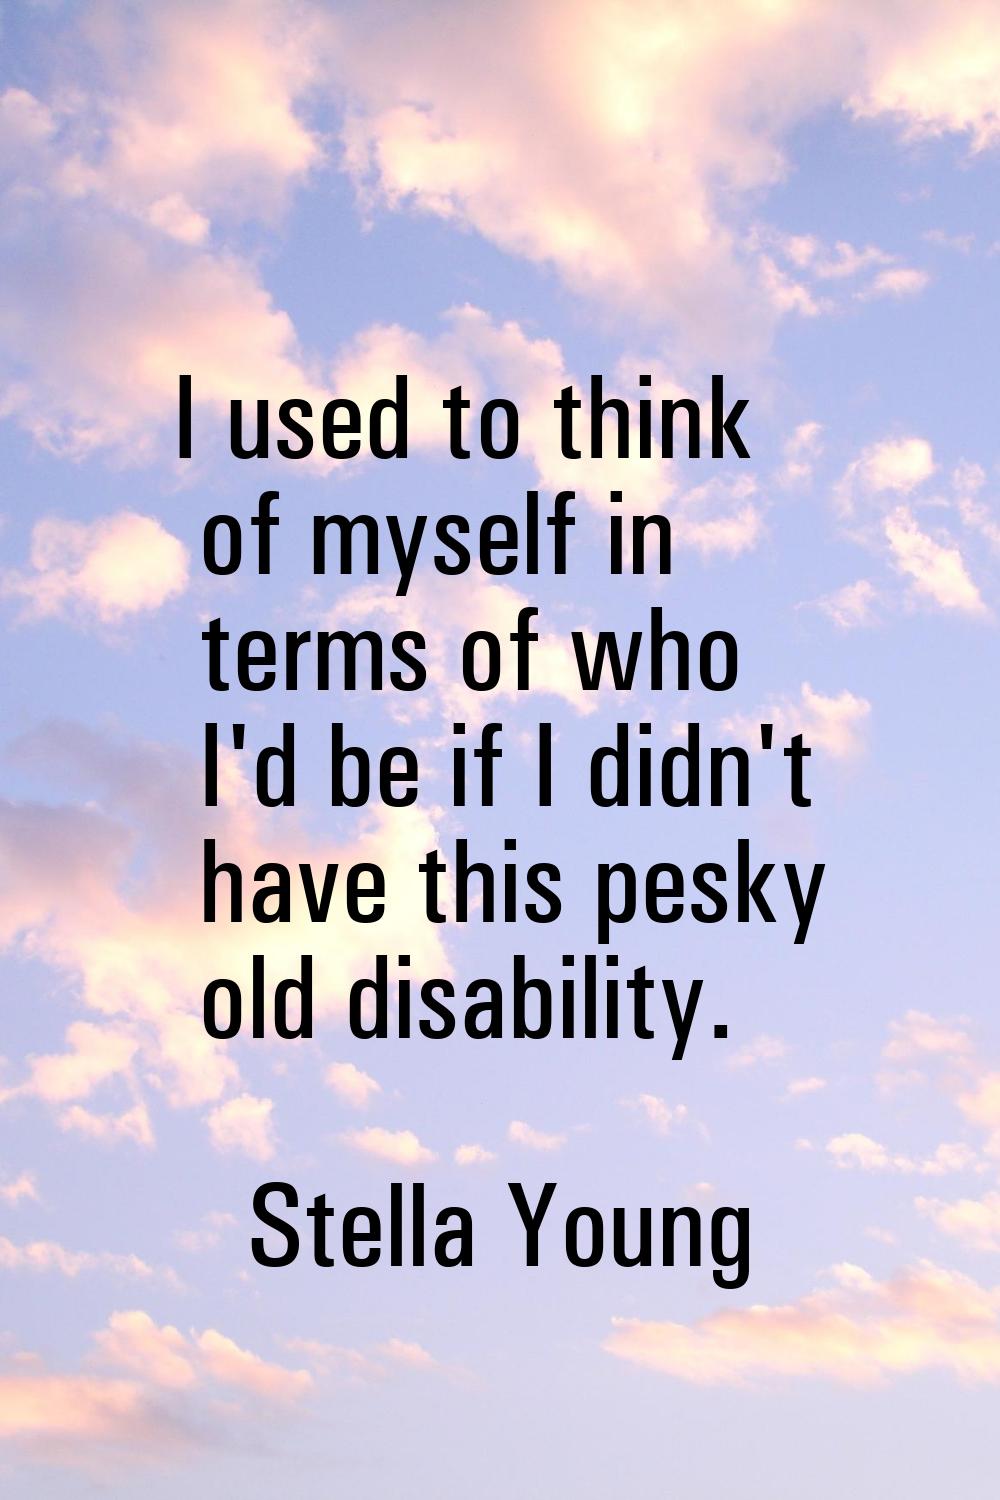 I used to think of myself in terms of who I'd be if I didn't have this pesky old disability.